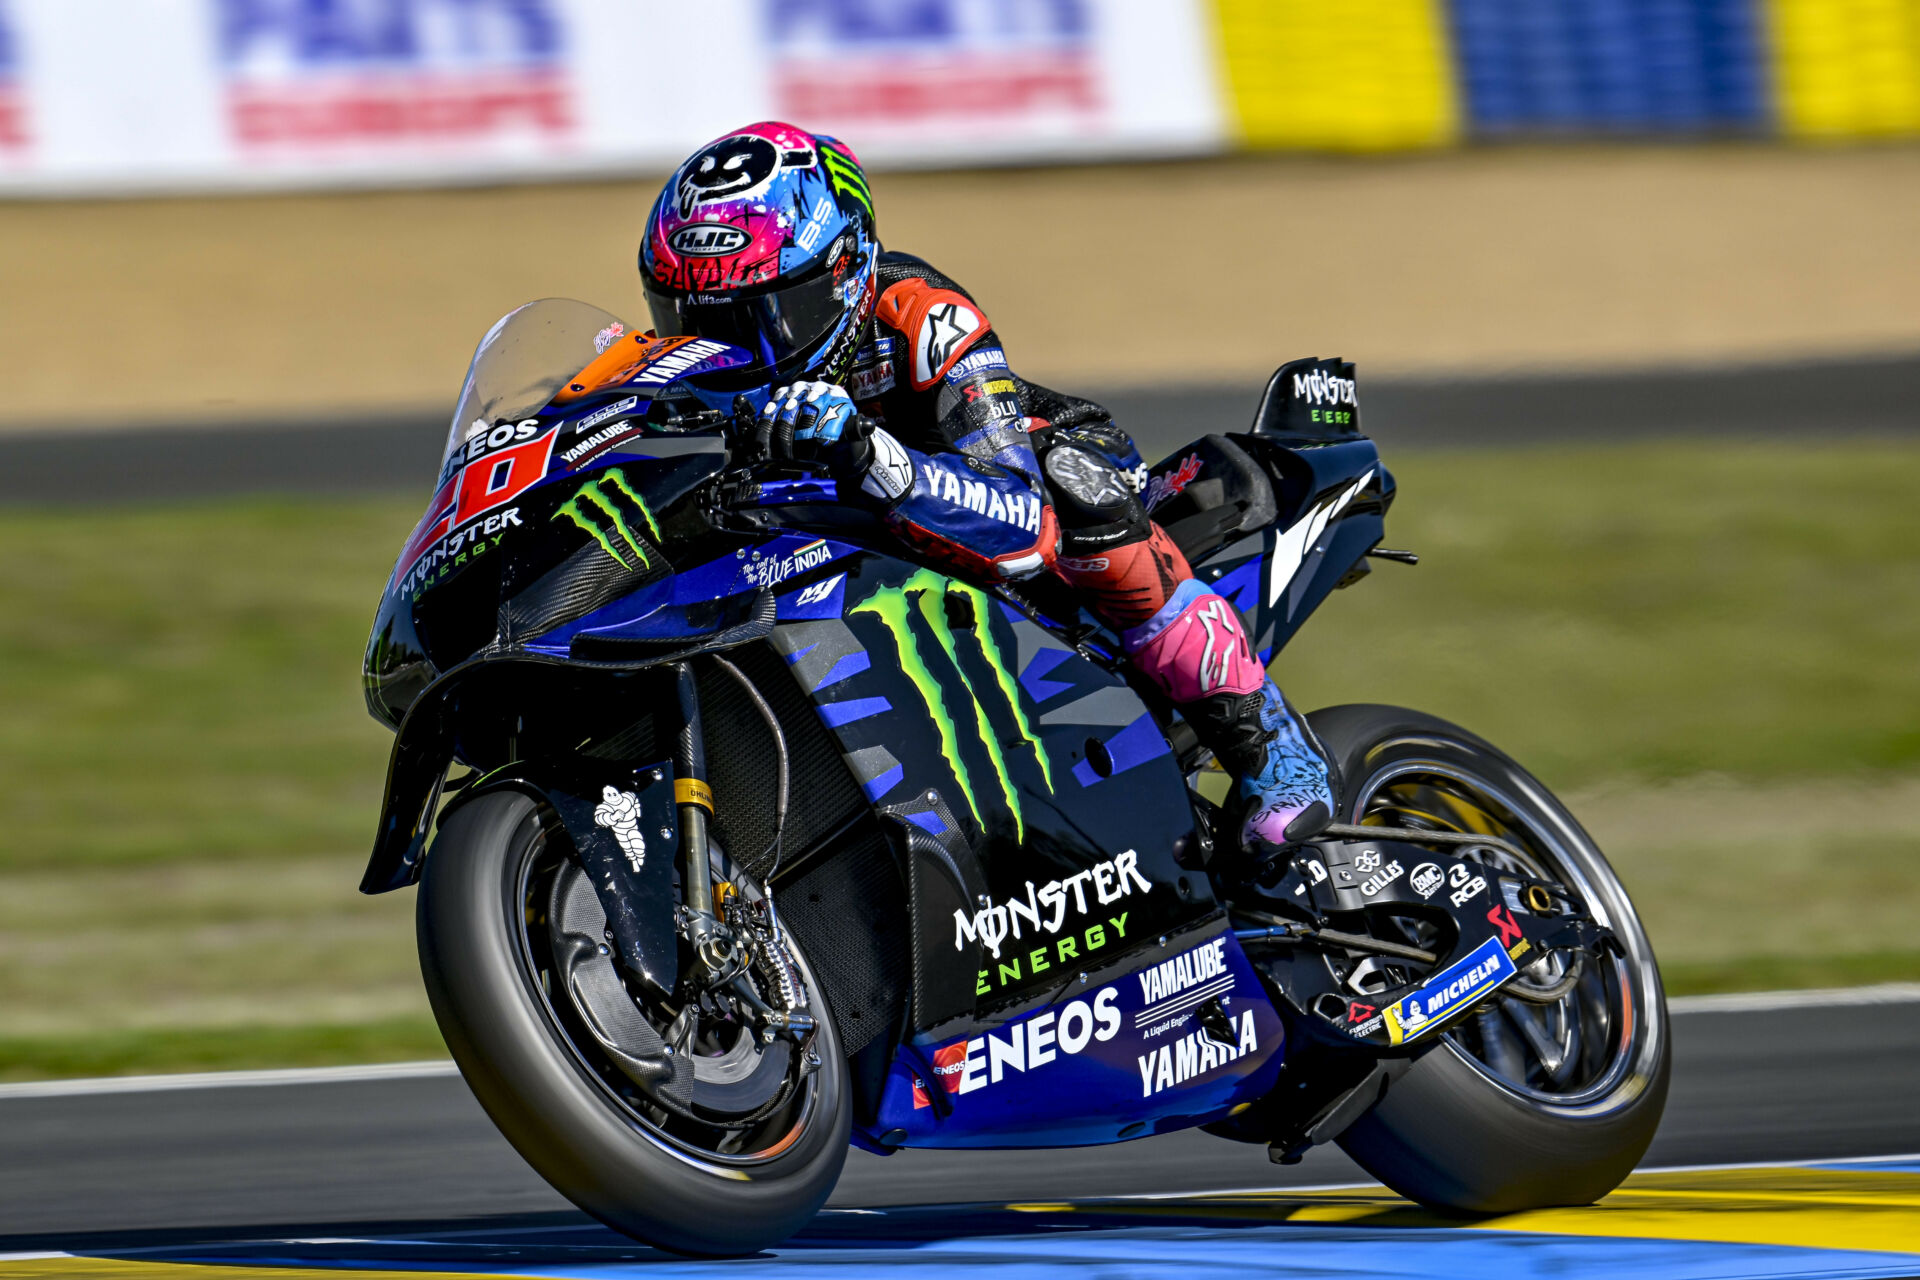 Fabio Quartararo (20) on his Monster Energy Yamaha YZR-M1, as it appeared during practice at Le Mans. Photo courtesy Monster Energy Yamaha.